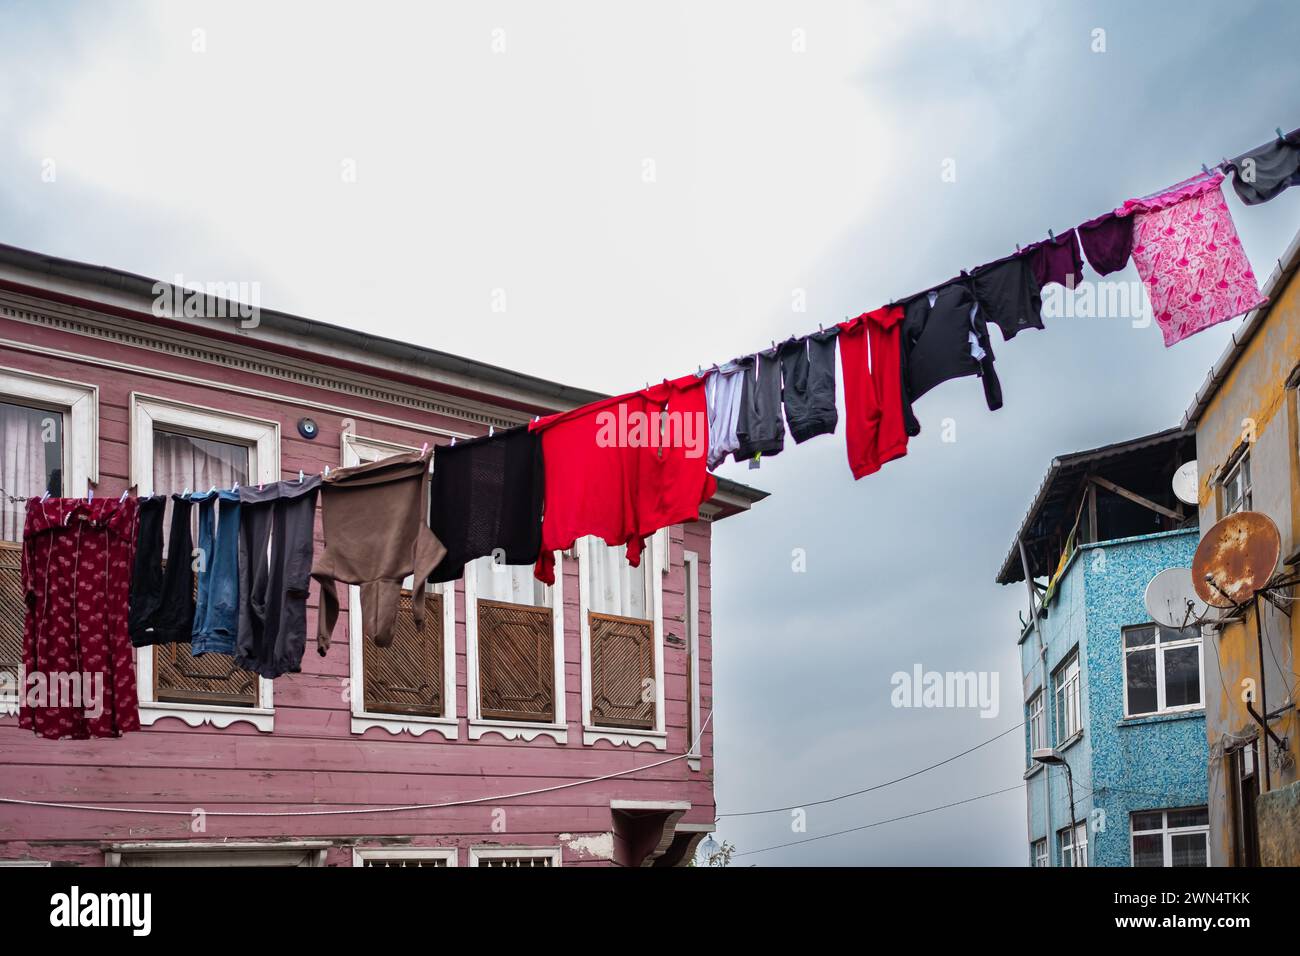 Laundry hanging on a clothes line in old city street. Hanging Laundry. Washed clothes on lines between buildings. Drying clothes hanging outside. Poor Stock Photo